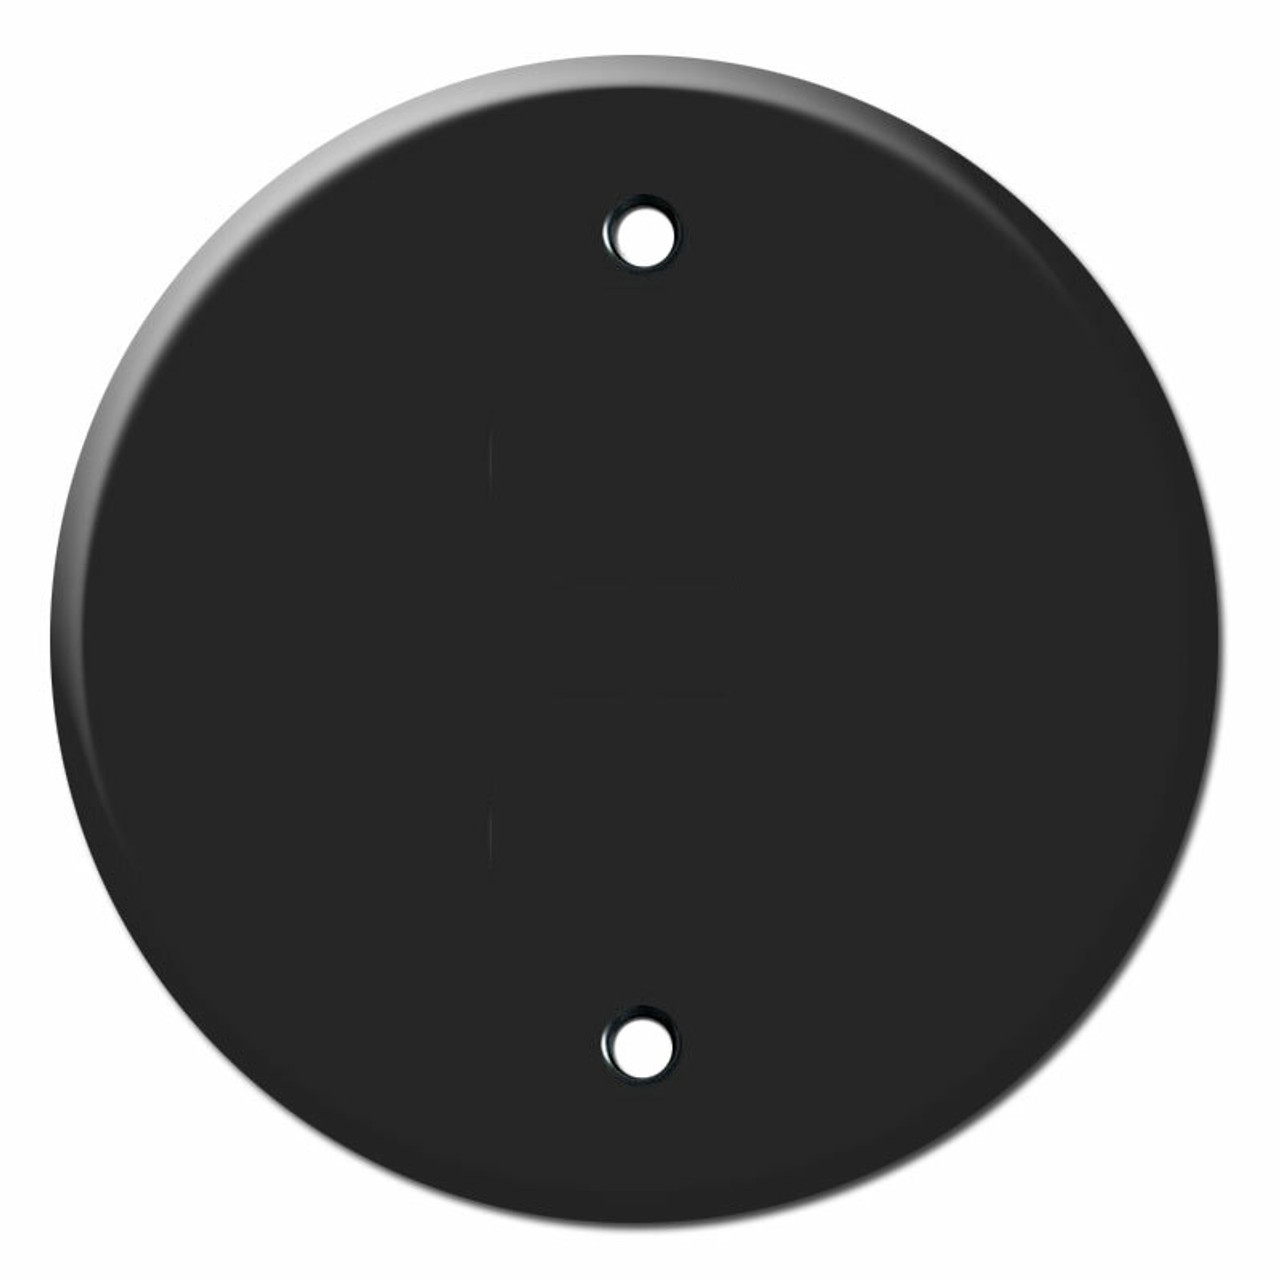 Round Blank Ceiling Outlet Cover for 4 Electrical Box - Black